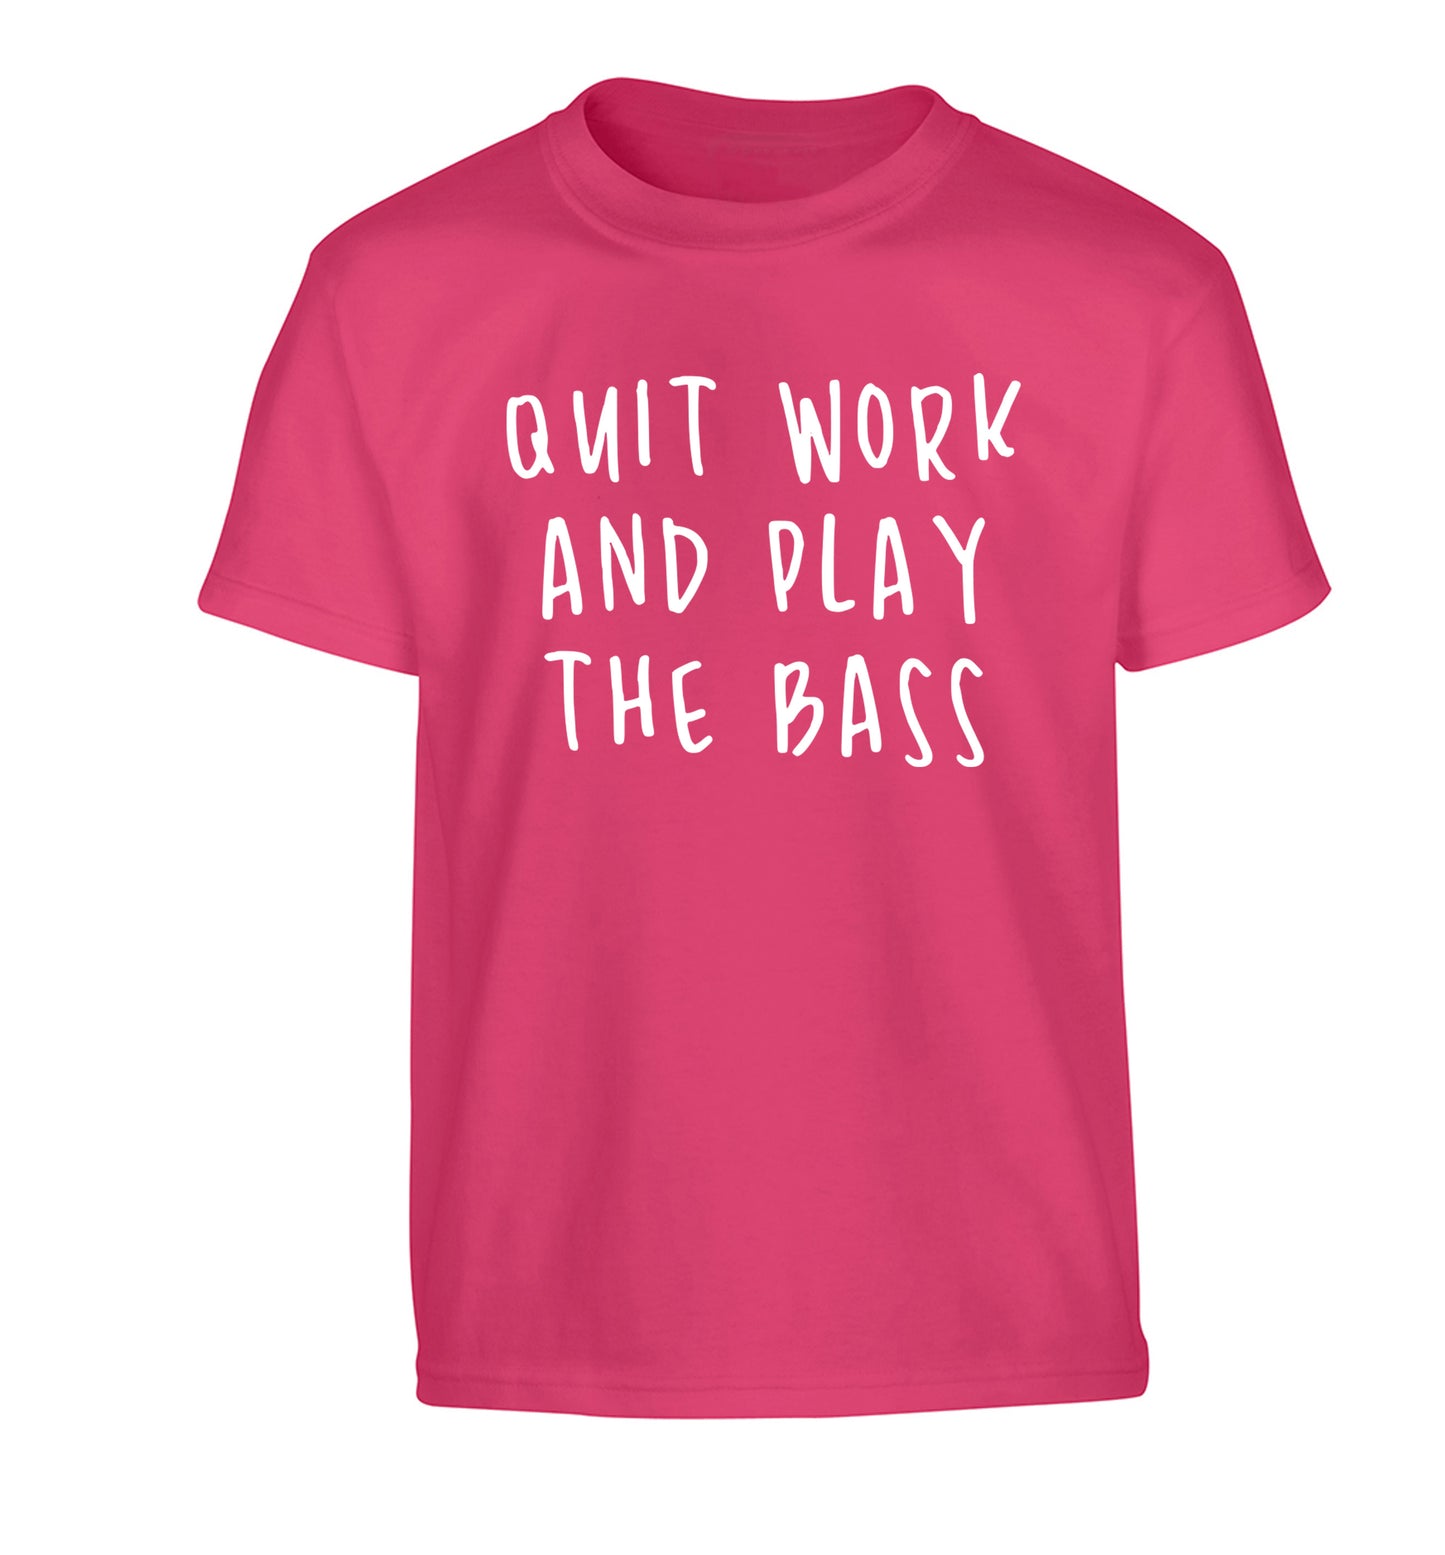 Quit work and play the bass Children's pink Tshirt 12-14 Years